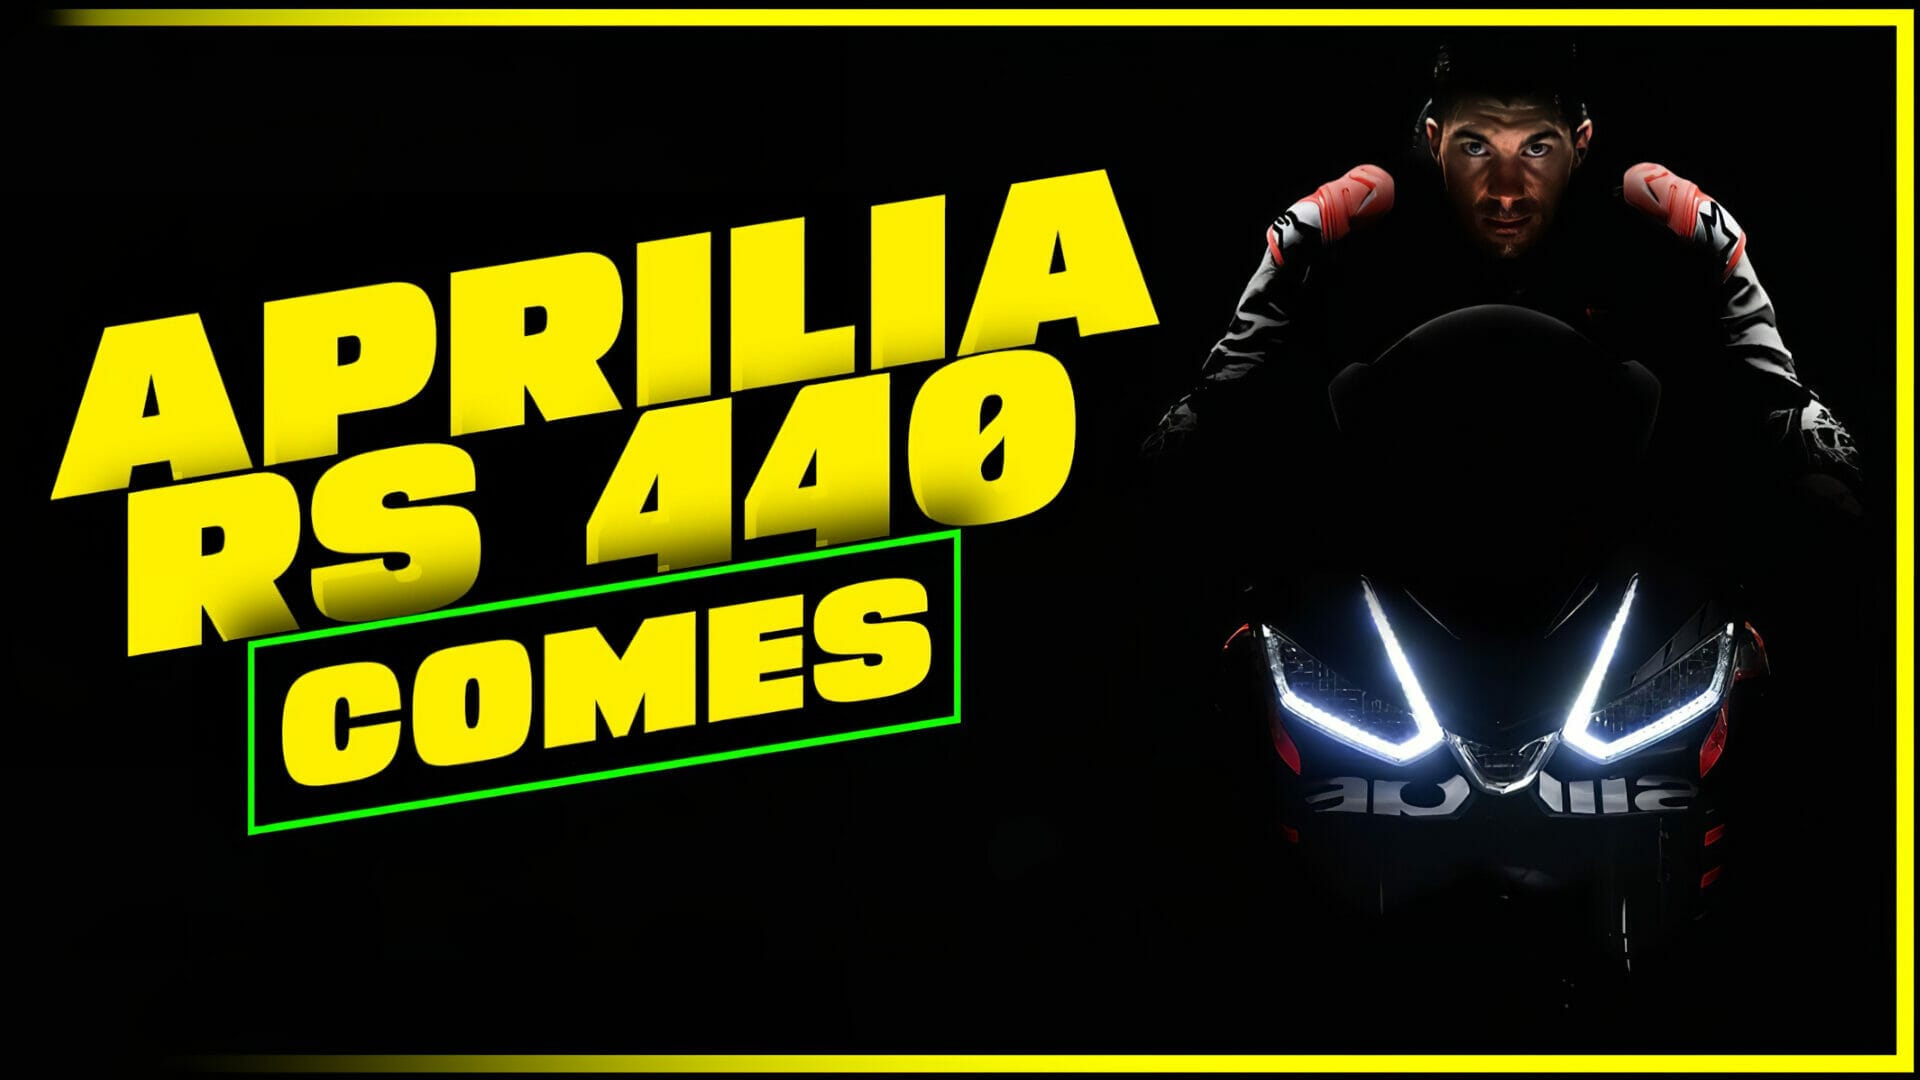 Aprilia RS 440: The speculations, secrets and revelations before the big debut